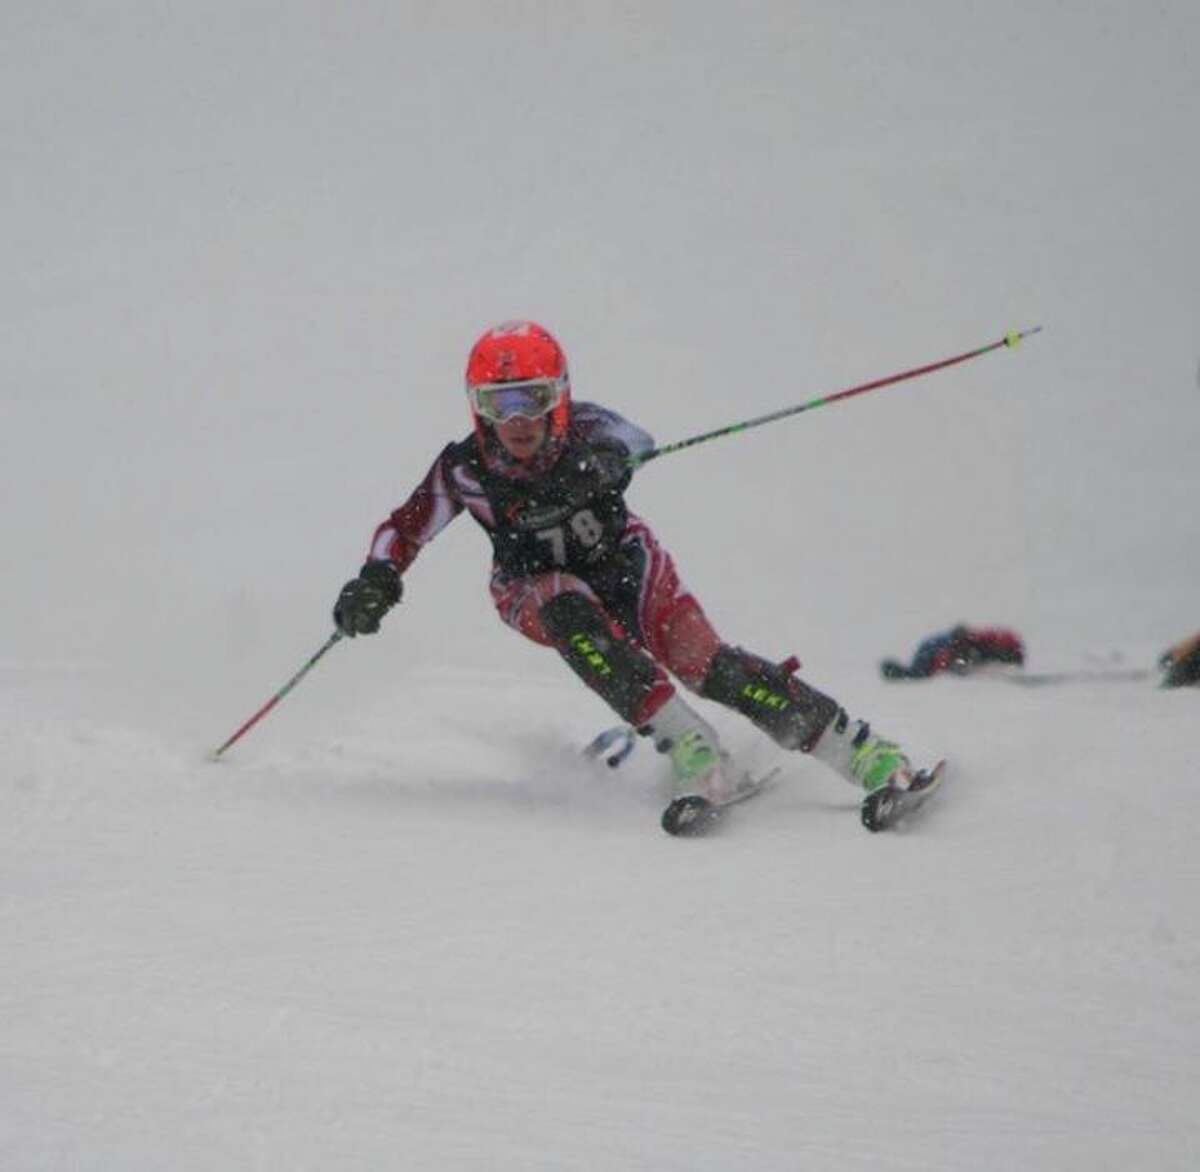 Hunter Montgomery of Queensbury is one of the Times Union's 2018 Athletes of the Year for the sport of skiing.